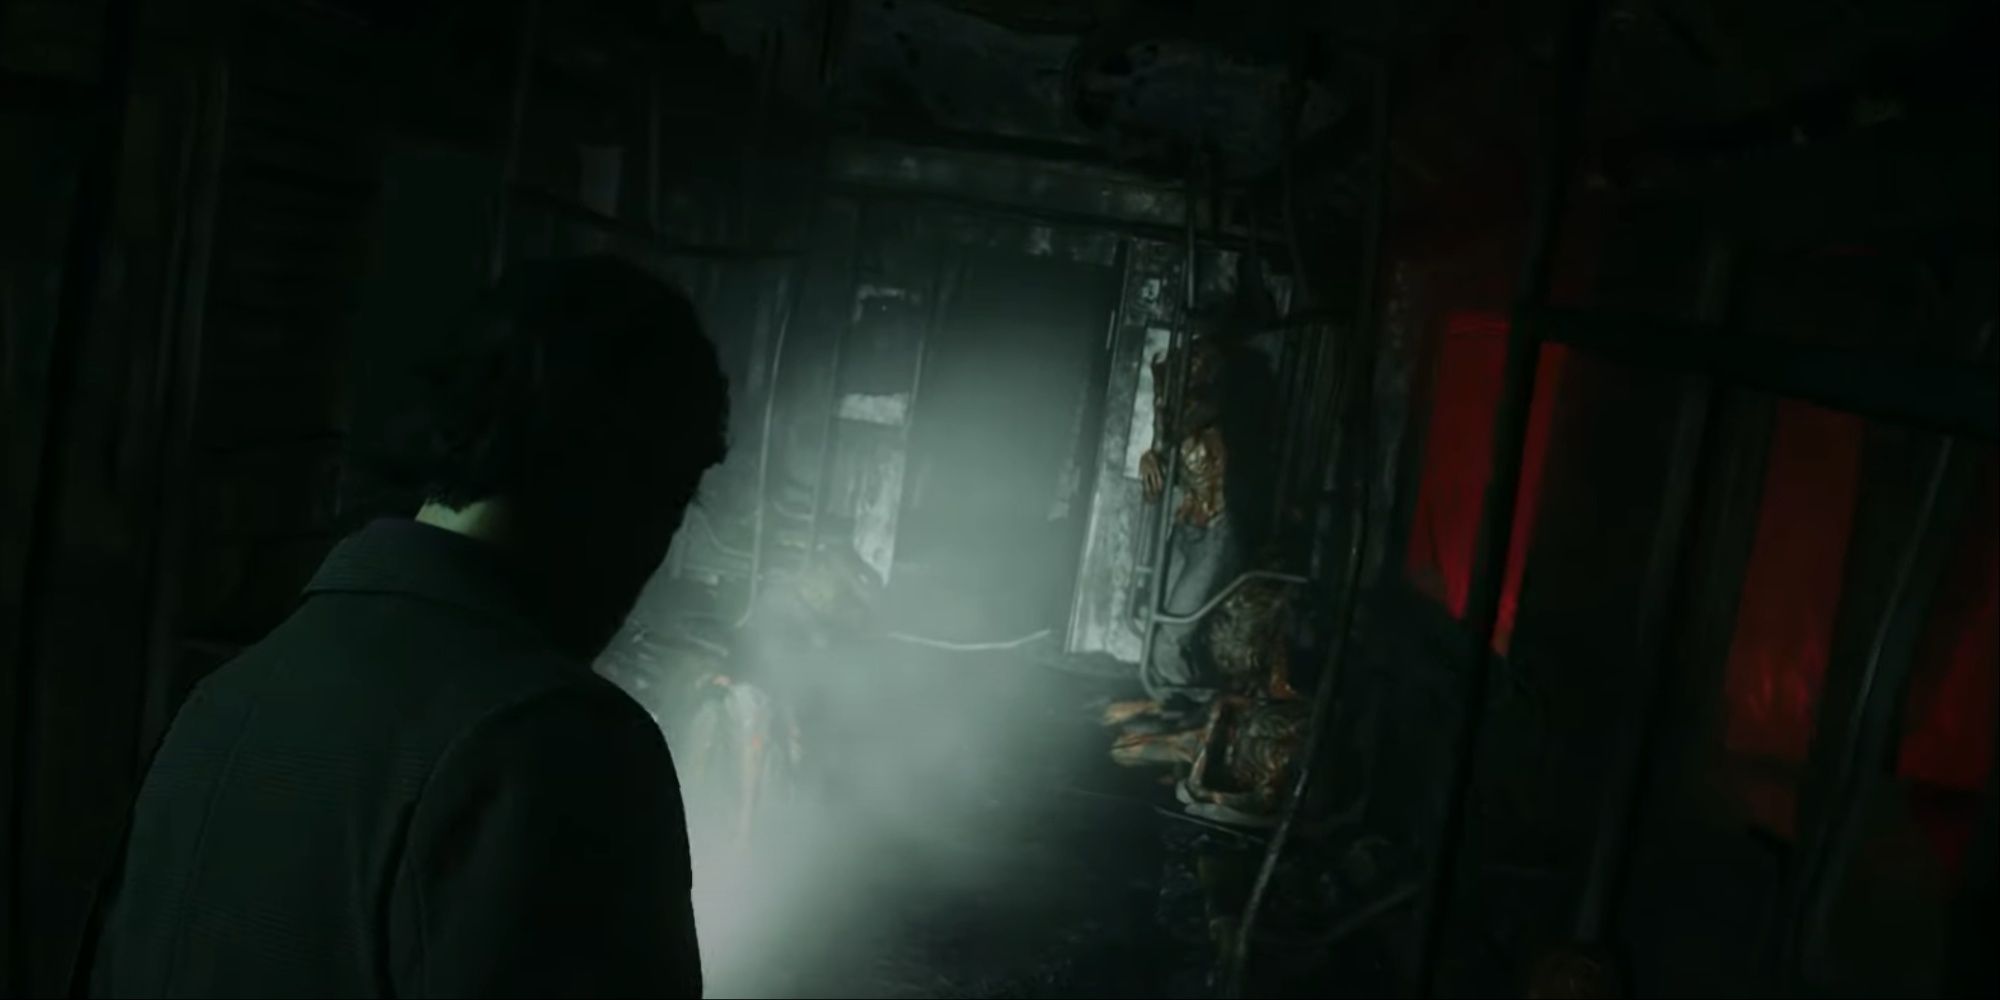 Alan walking through a scorched derailed subway car in Caldera Station, corpses laying left and right.